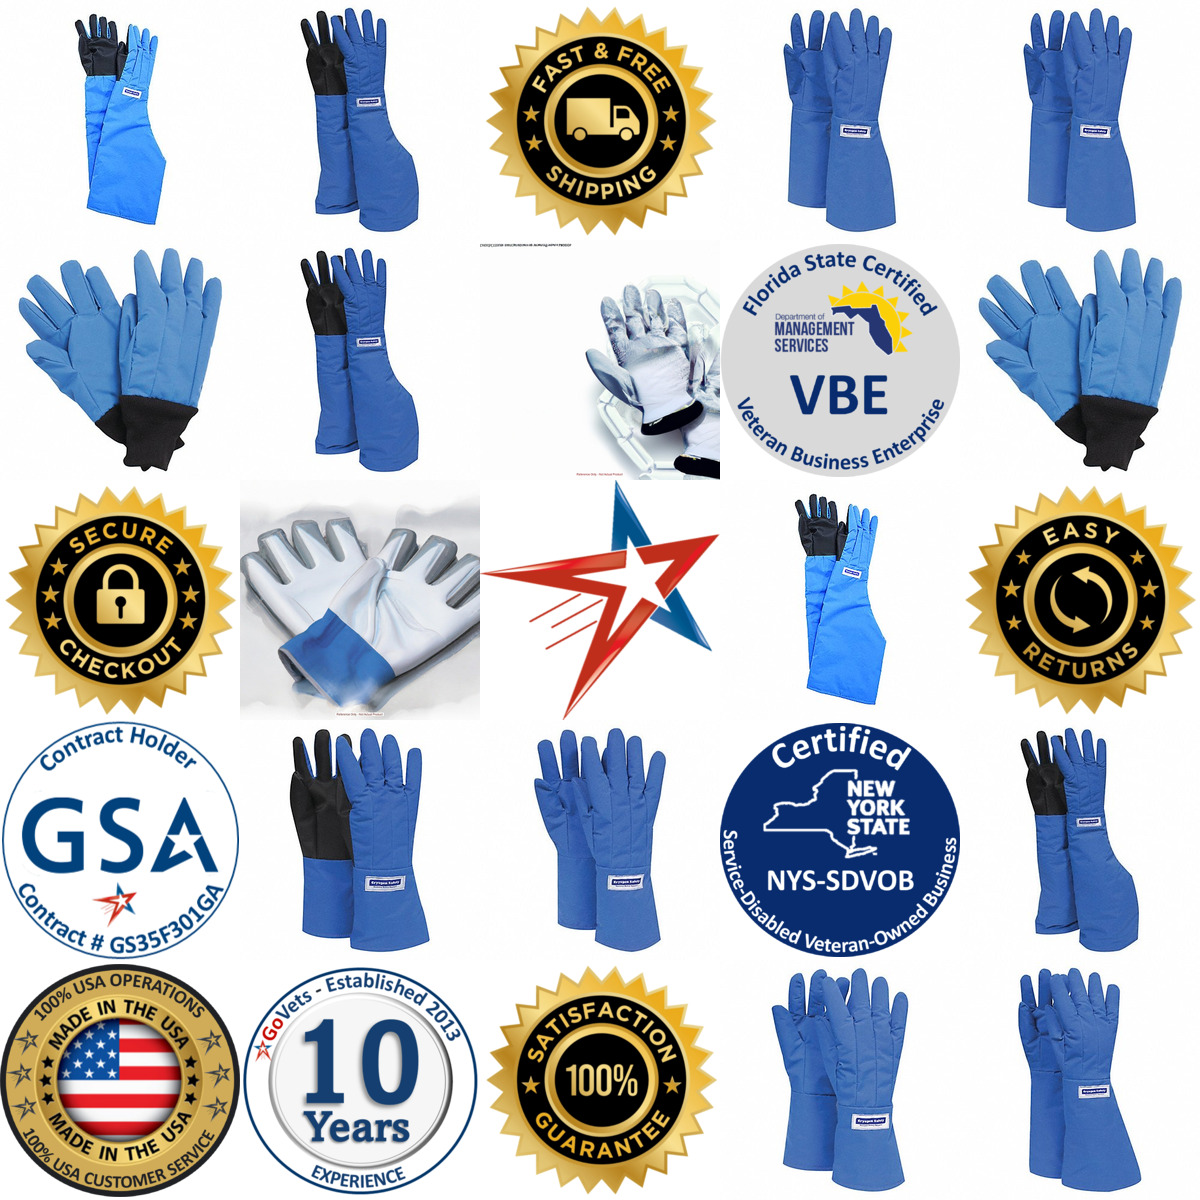 A selection of Cryogenic Gloves products on GoVets